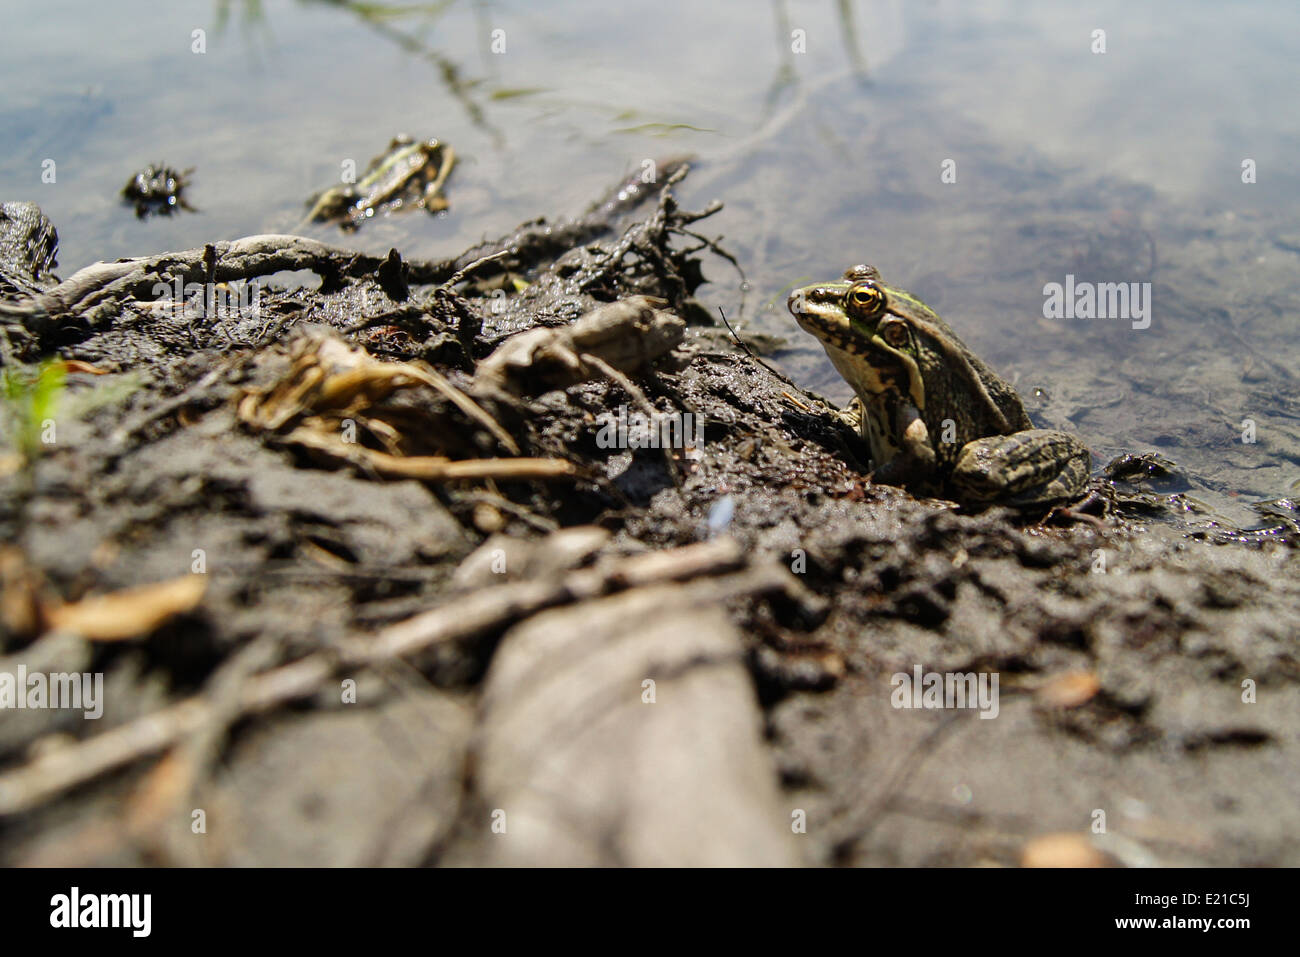 frogs with a bright color under the hot sun at a bog Stock Photo